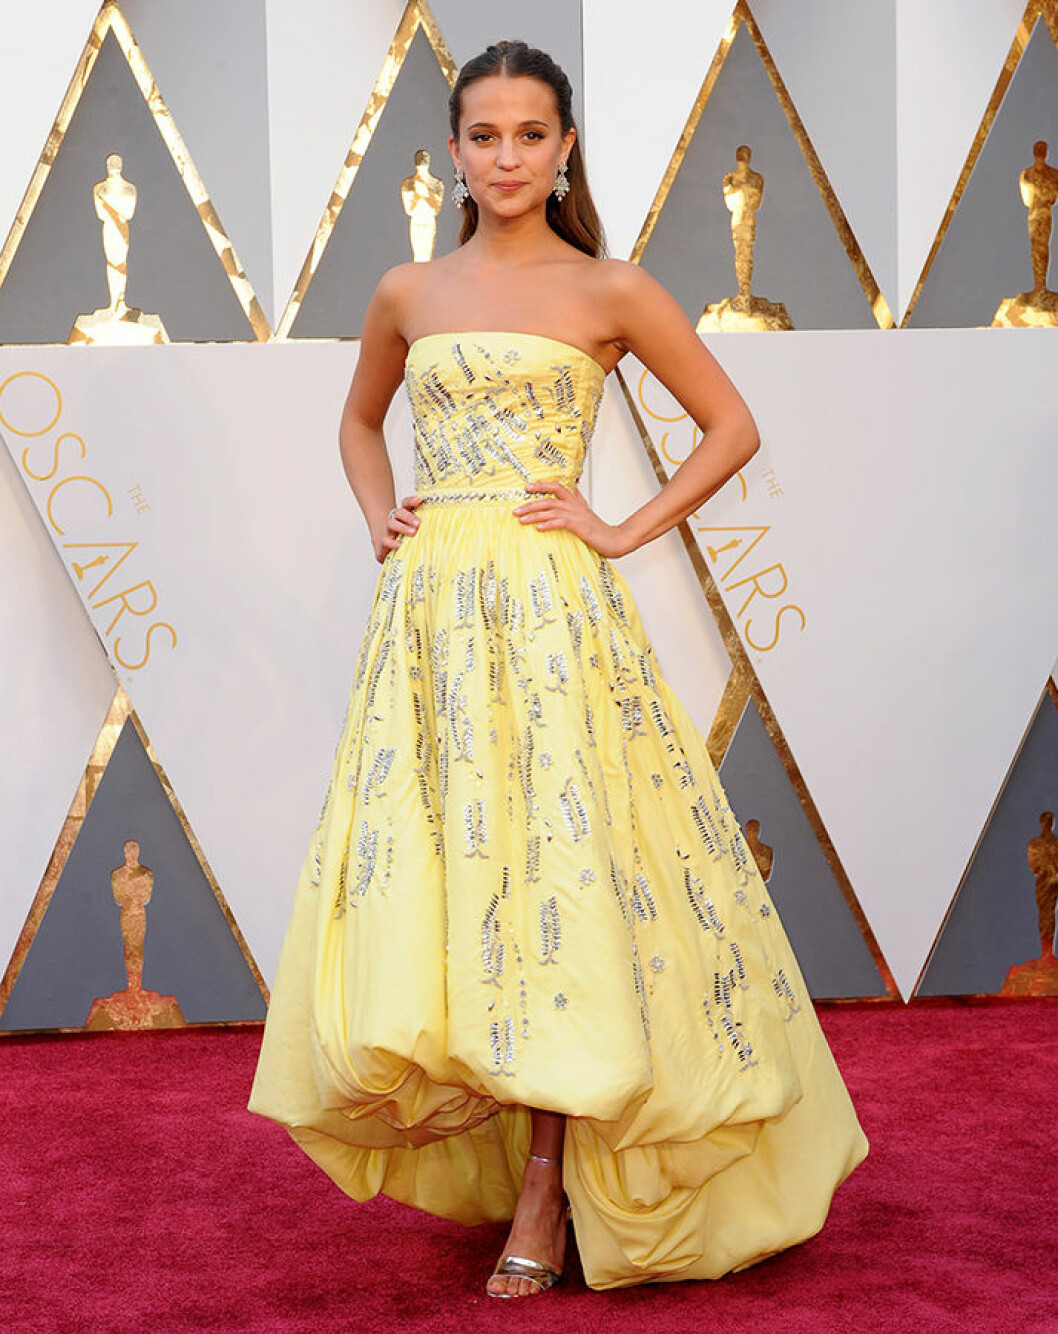 Alicia Vikander at arrivals for The 88th Academy Awards Oscars 2016 - Arrivals 1, The Dolby Theatre at Hollywood and Highland Center, Los Angeles, CA February 28, 2016. Photo By: Elizabeth Goodenough/Everett Collection